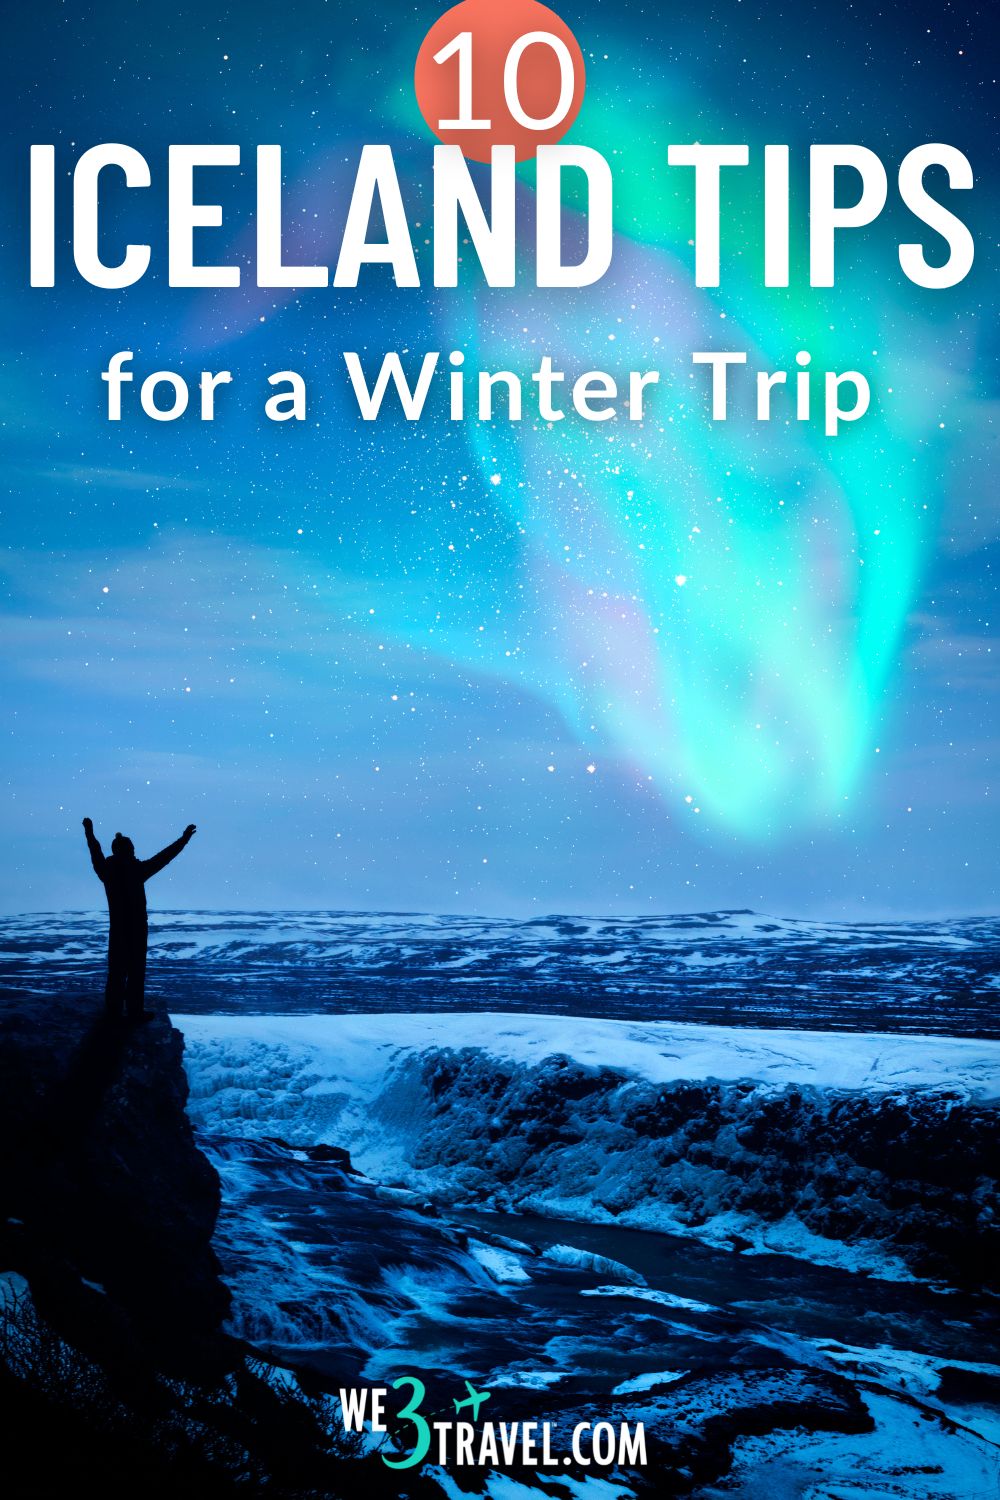 10 Tips for visiting Iceland in winter. Want to see the Northern Lights or visit an ice cave? These are just some of the reasons to plan an Iceland winter trip. But there are also some drawback. Read these tips to make sure you are prepared to go to Iceland in the winter.